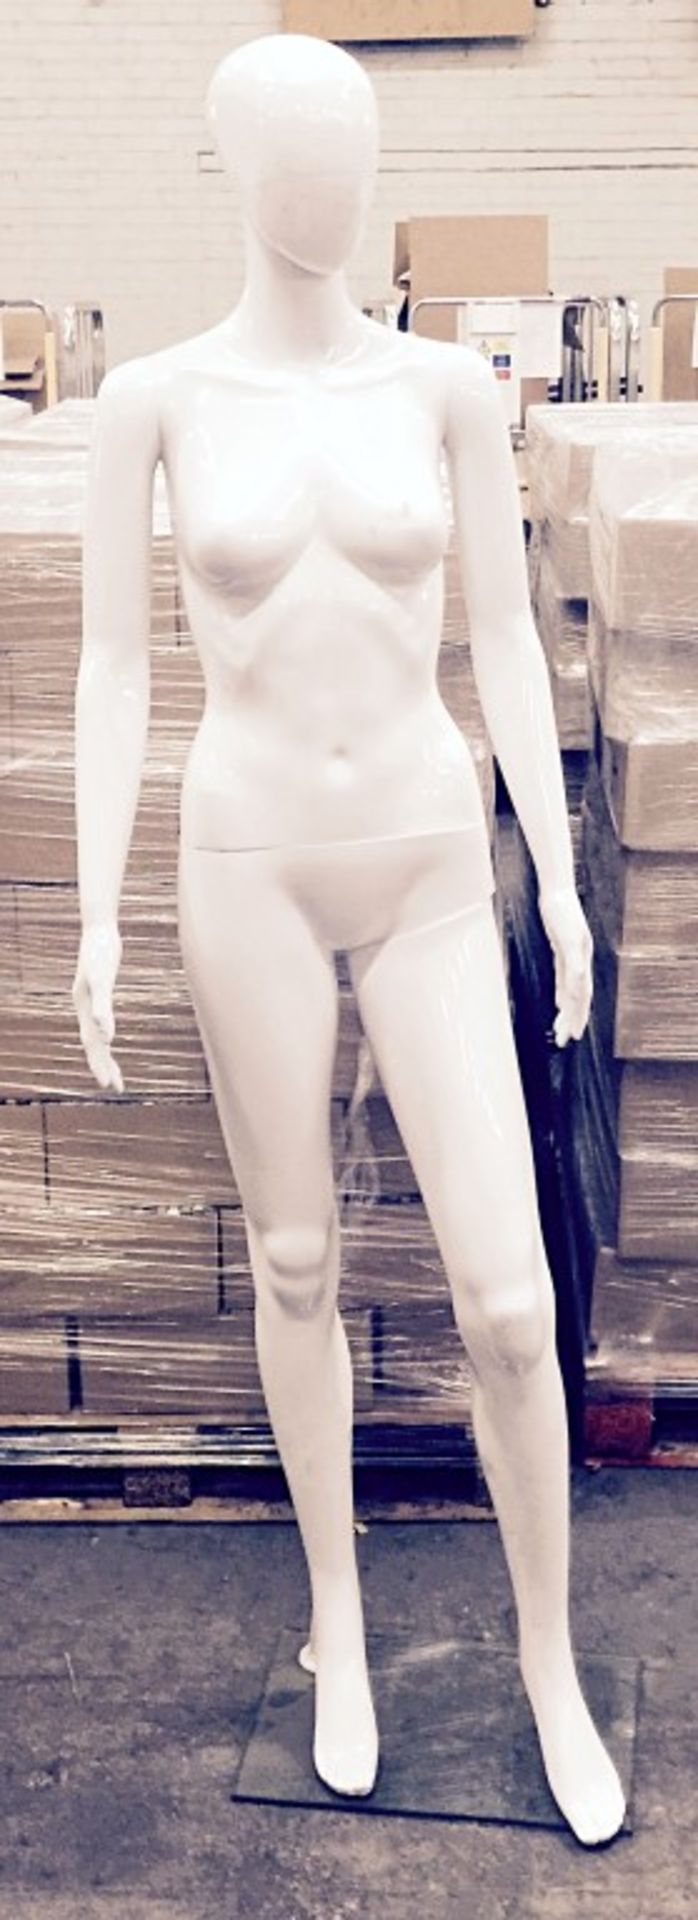 1 x Female Full Body Mannequin – Life Size Faceless Adult Form With Adjustable Head and Arms – White - Image 4 of 4